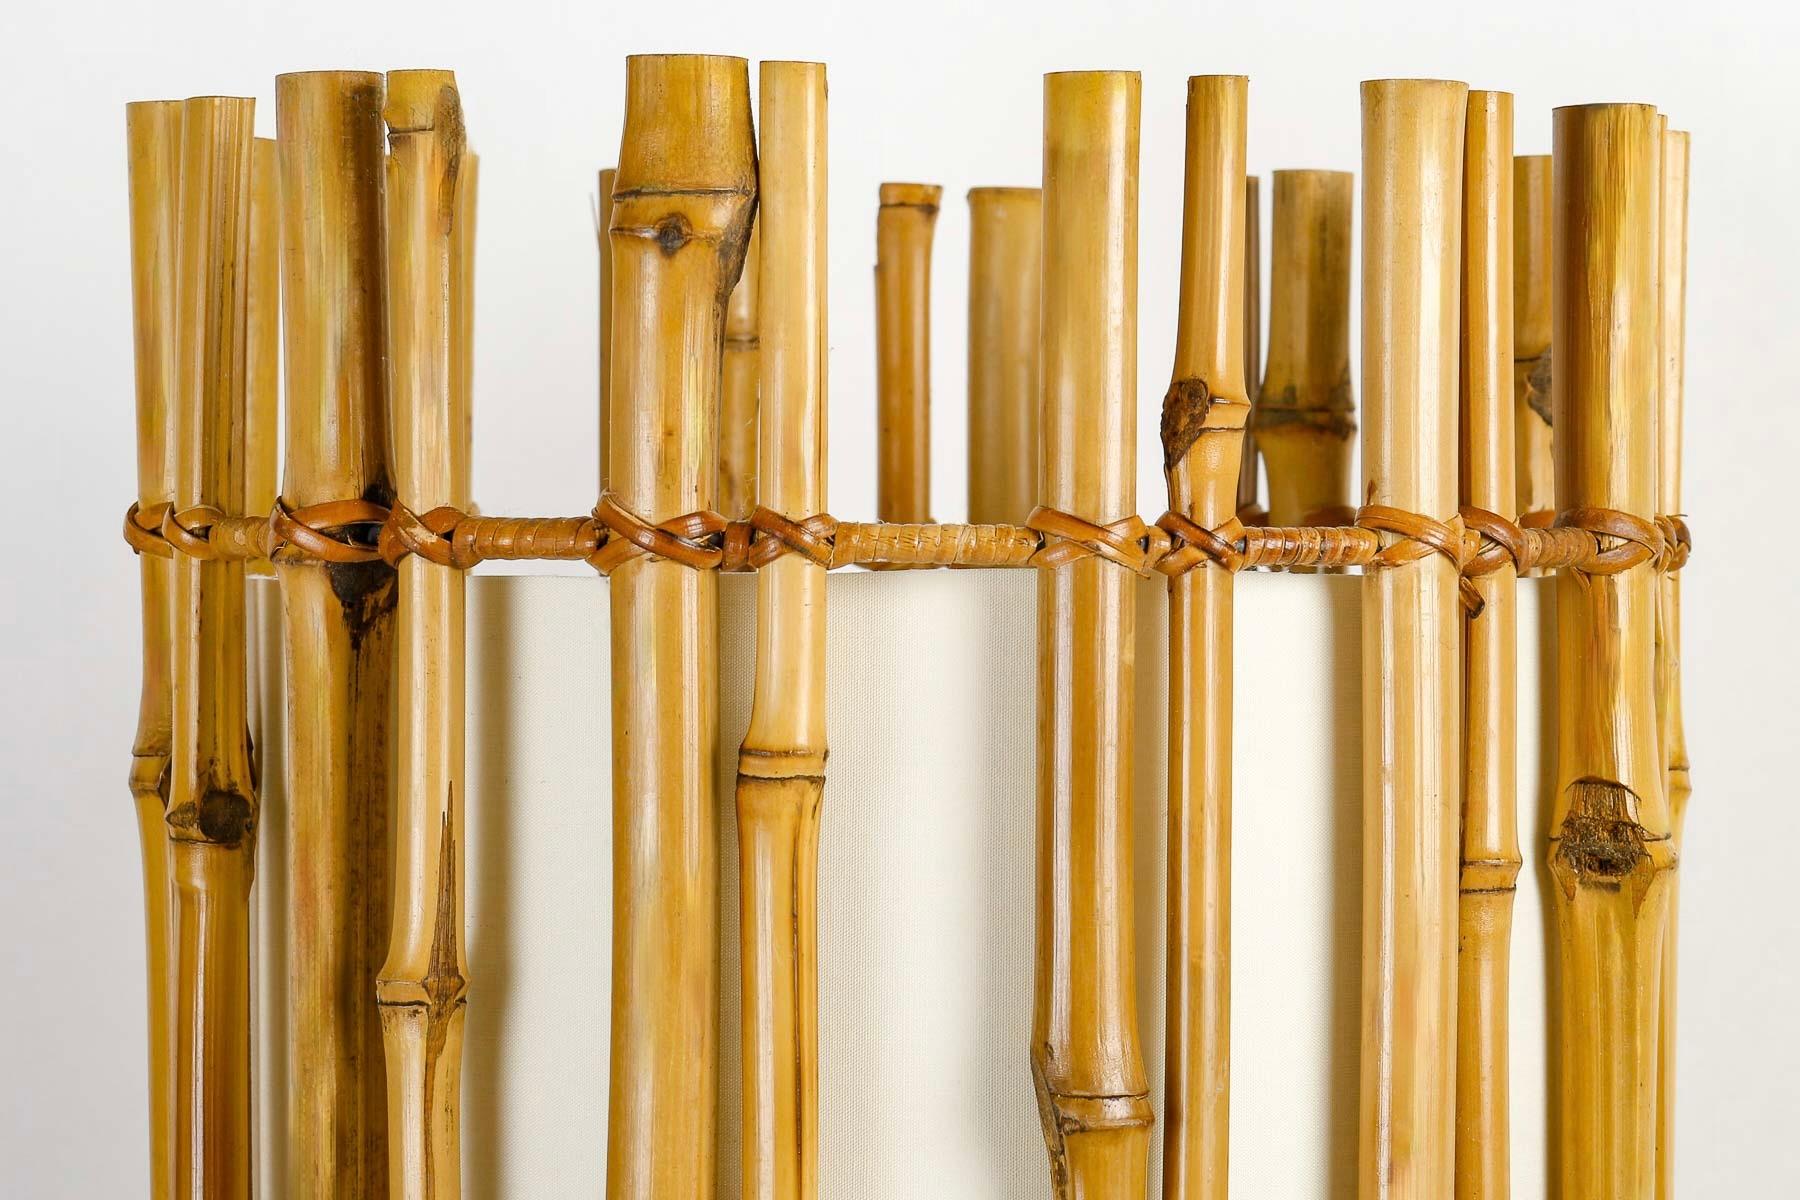 Composed of a cylinder of vertically positioned bamboo stems held together by 3 rattan-wire-clad circles at 3 different heights.
The bamboo cylinder is lined with an off-white lampshade placed inside it, highlighting the rattan rods.

1 light arm.